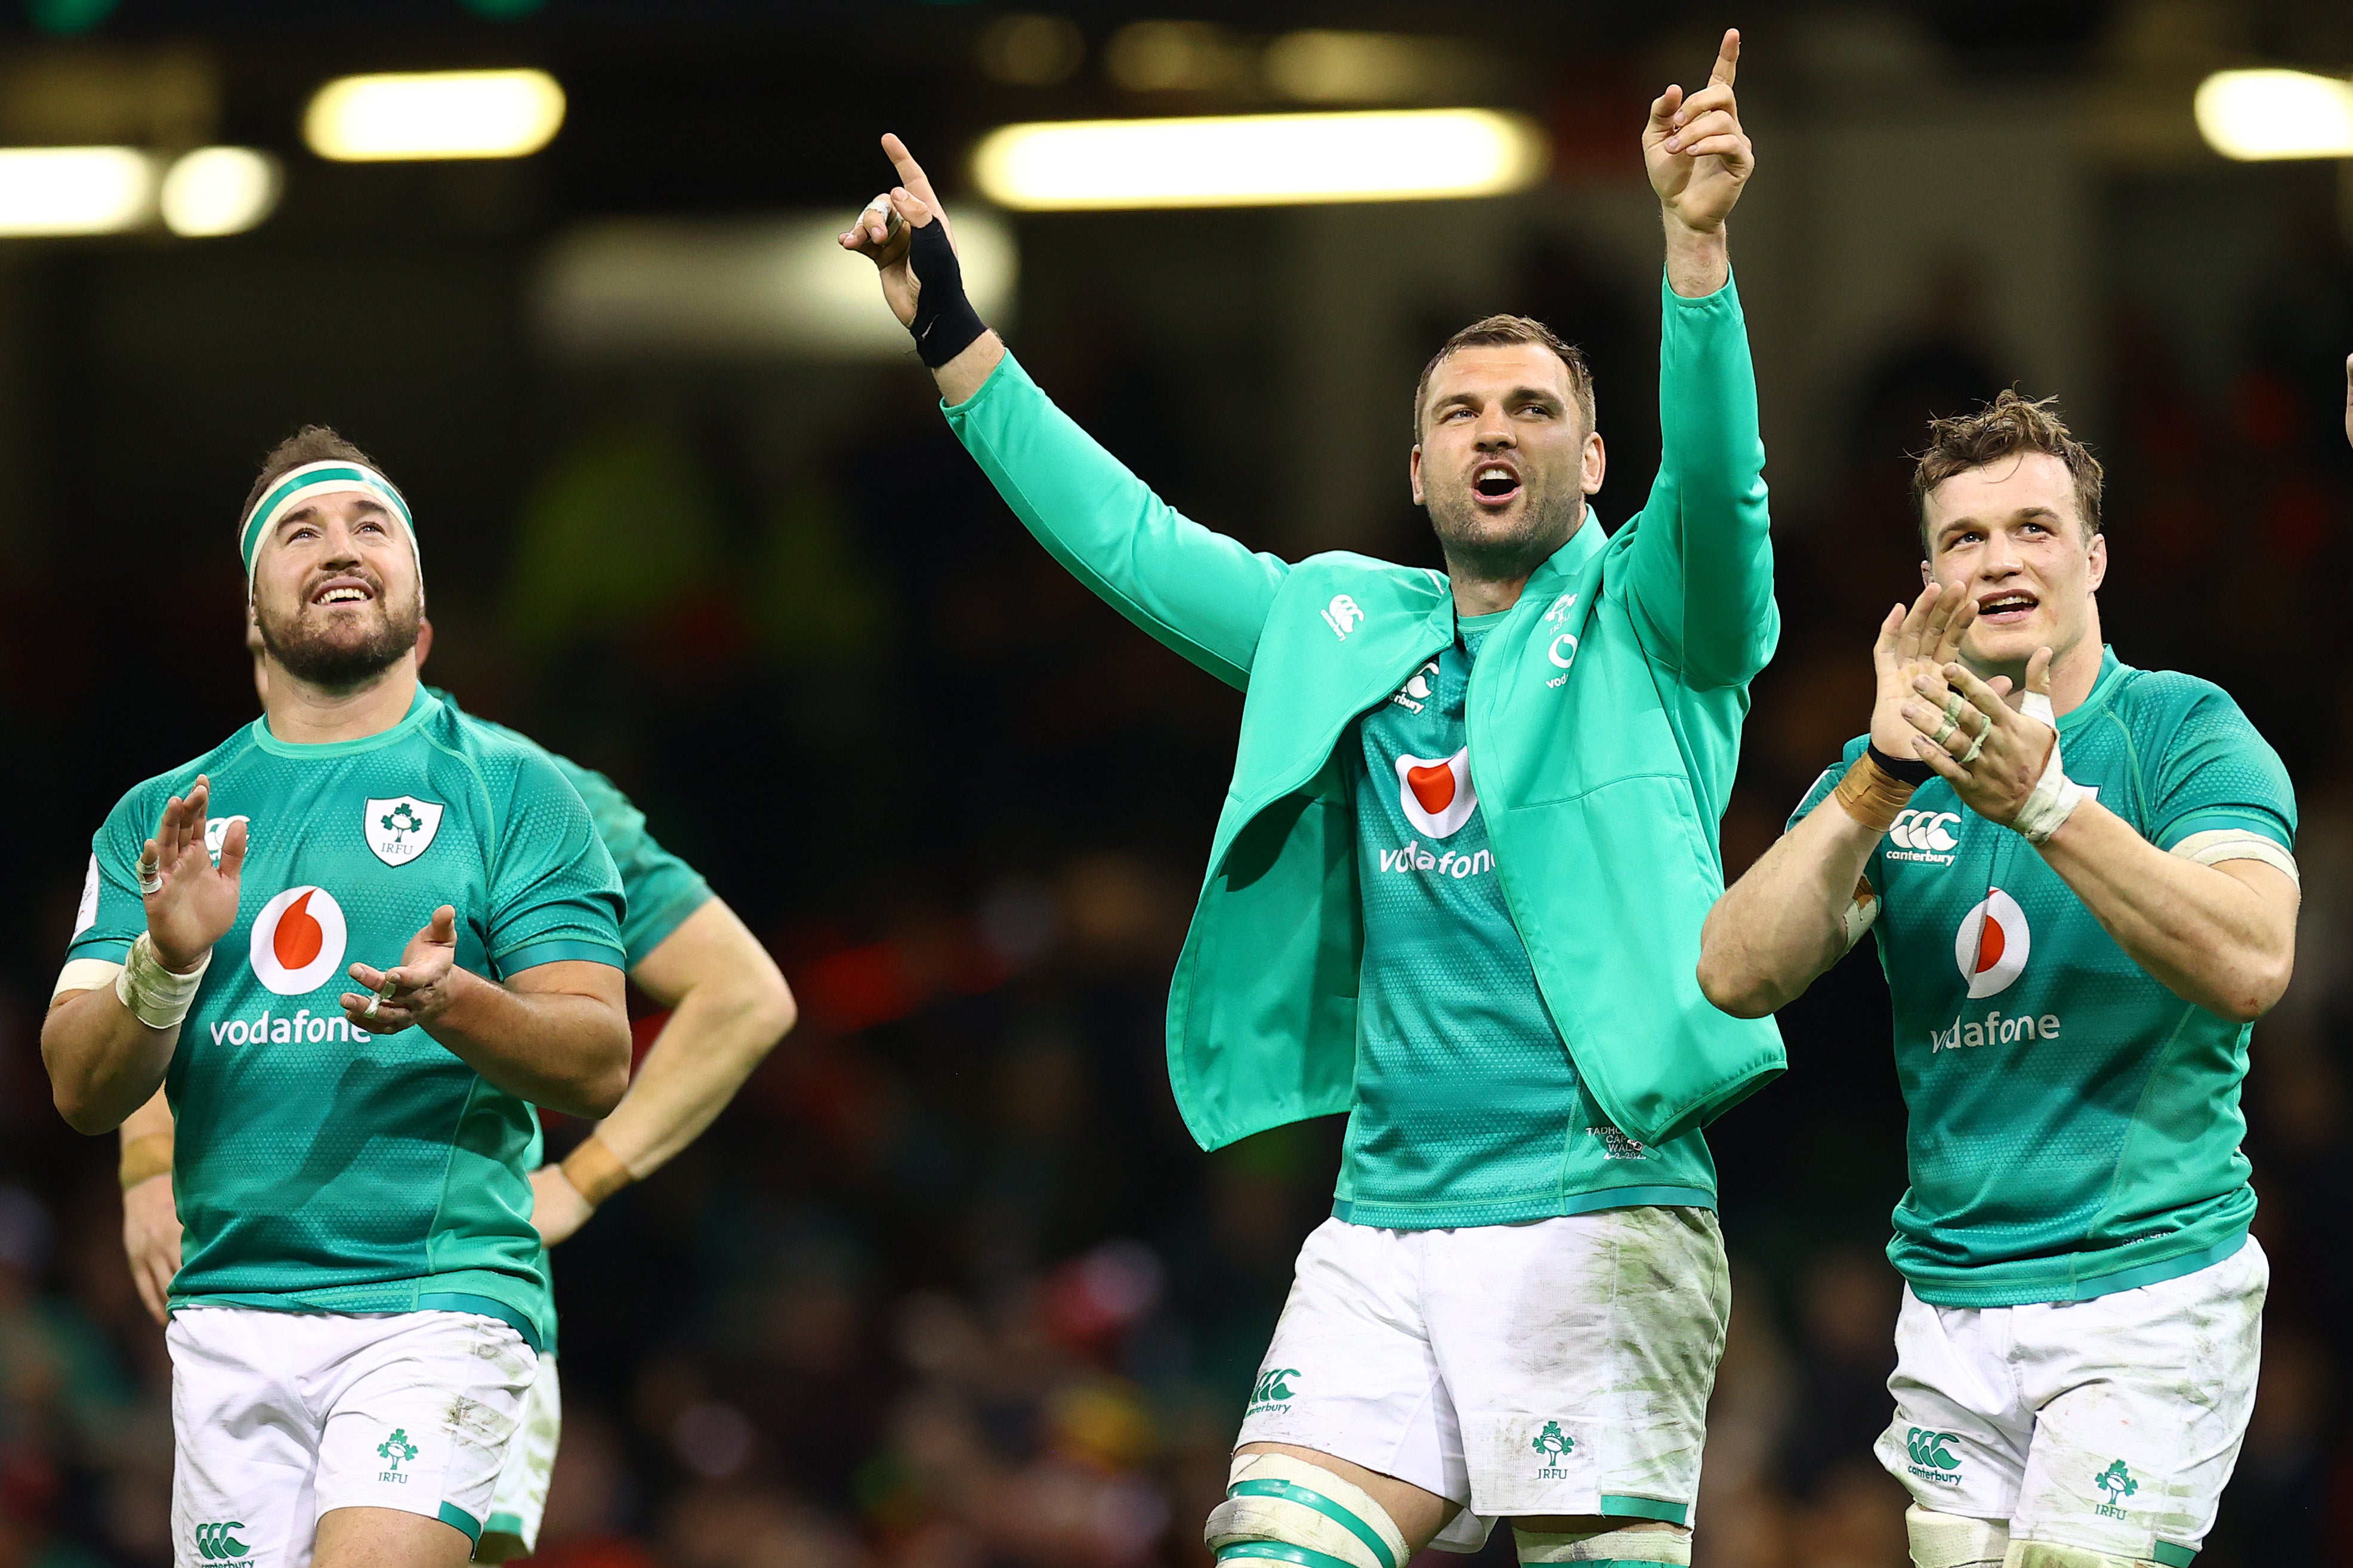 Ireland won big in Wales during last year’s Six Nations